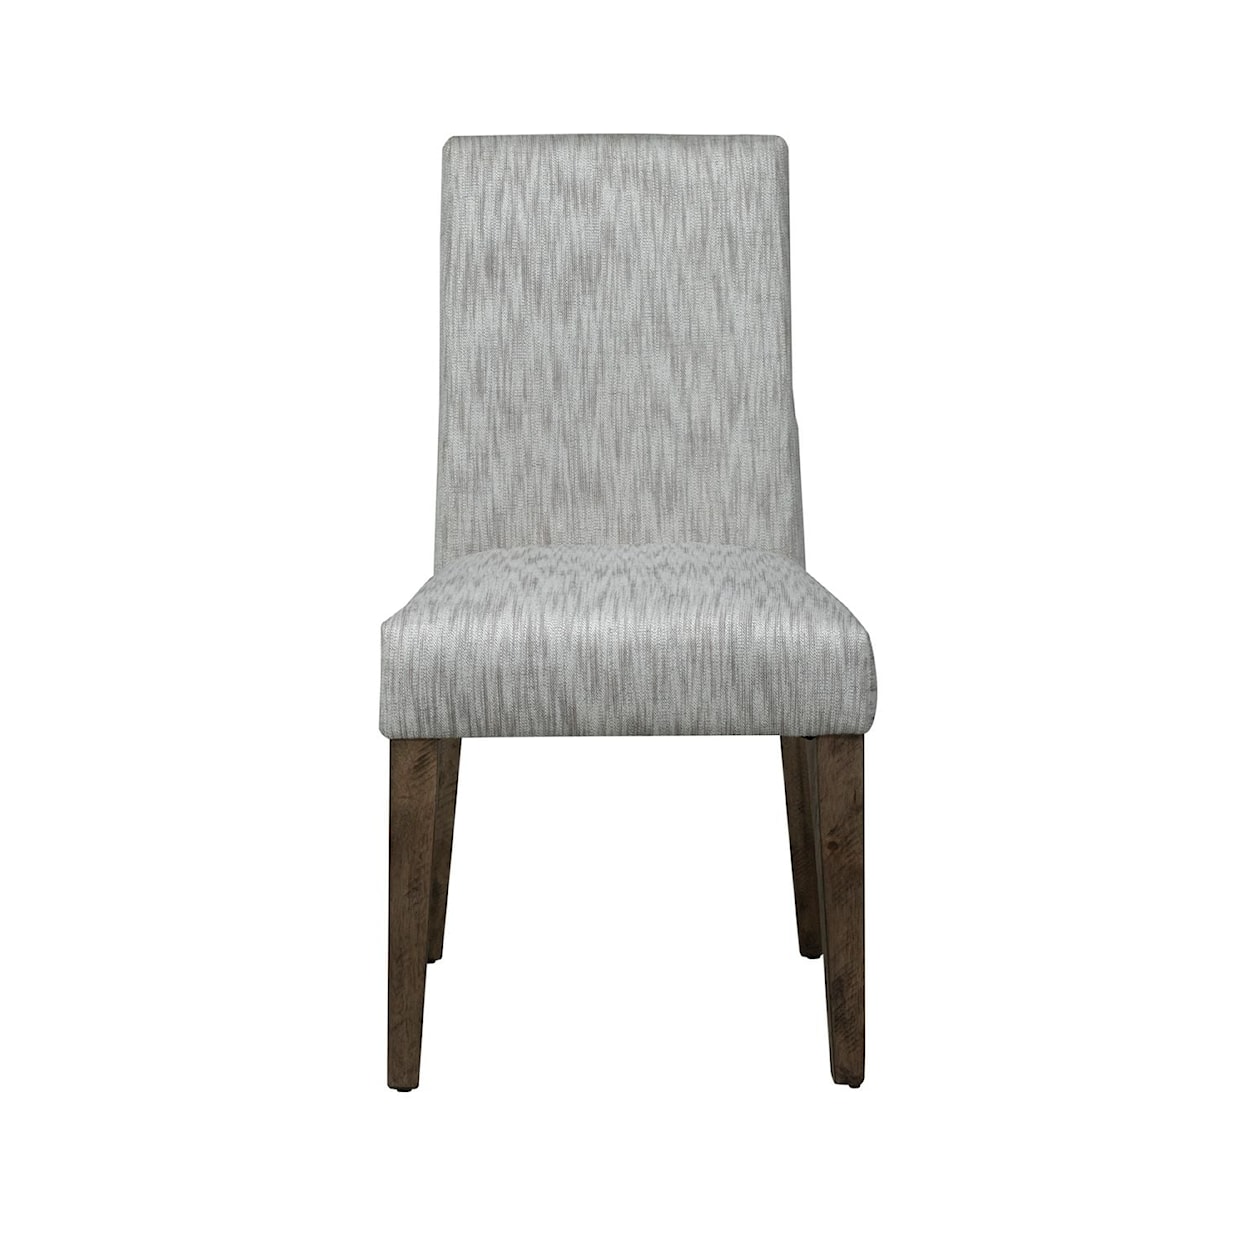 Liberty Furniture Horizons Upholstered Dining Side Chair